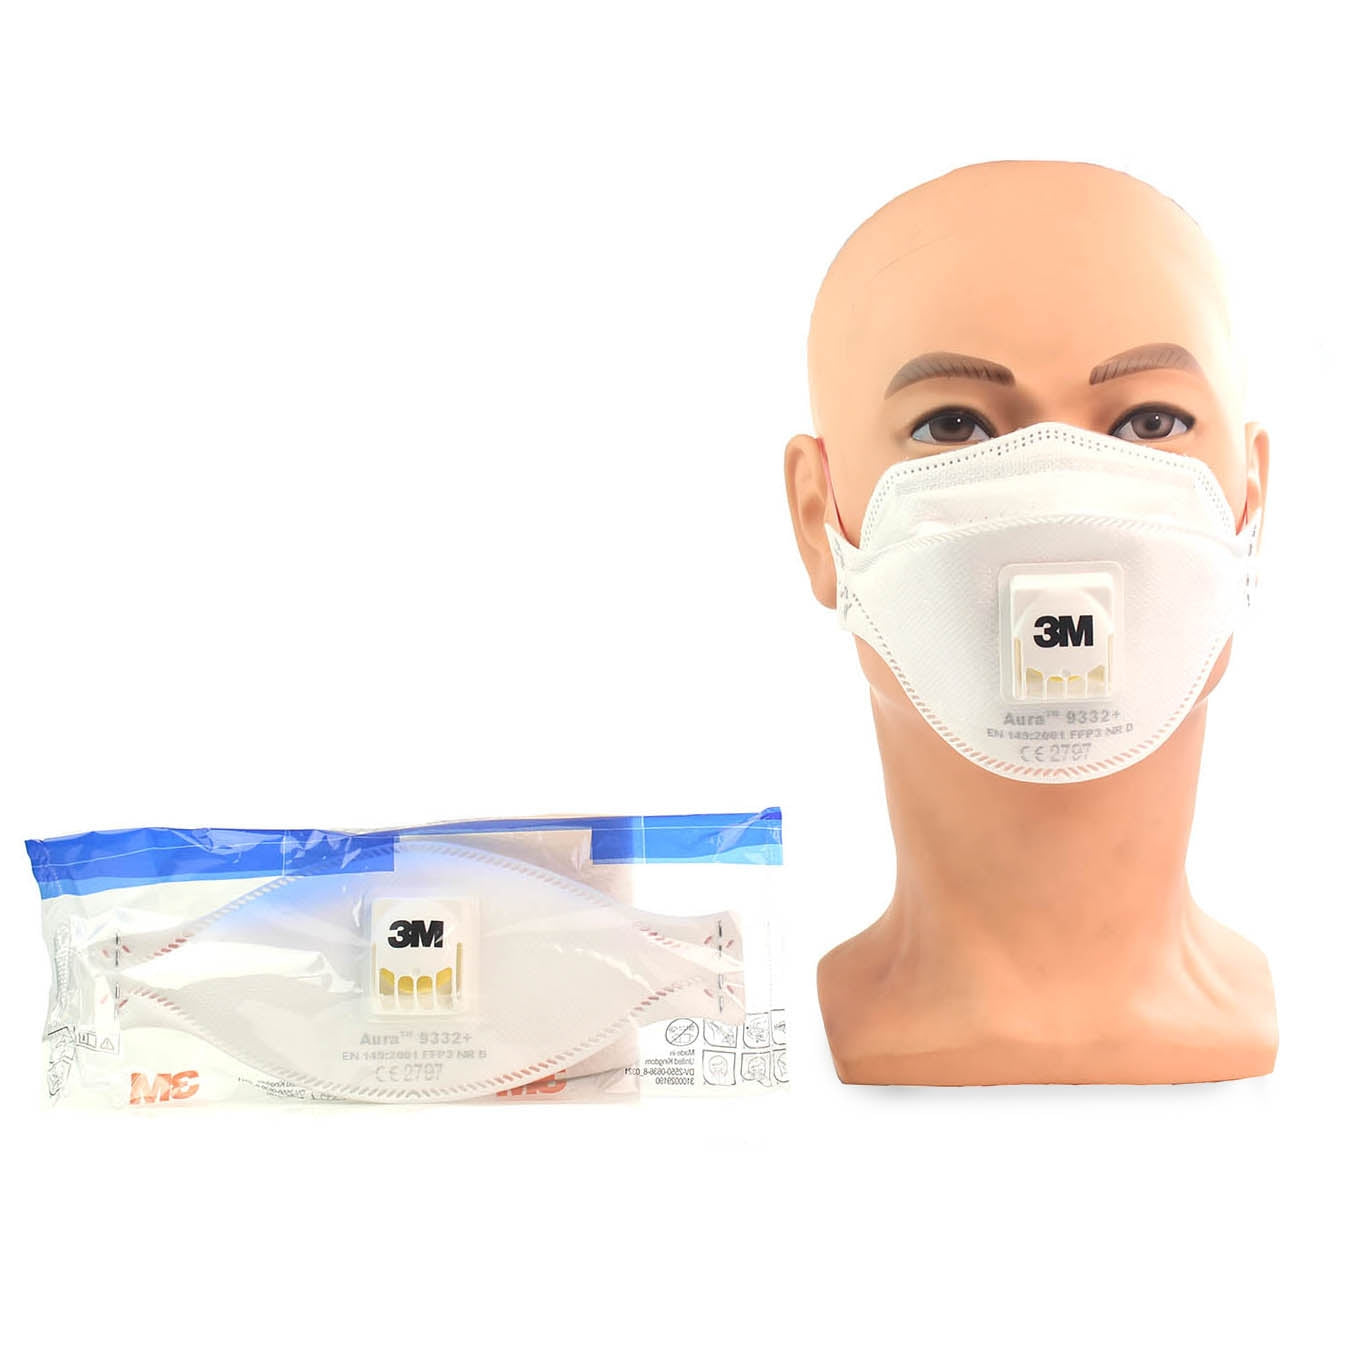 3M™ Particulate Respirator Face Mask FFP3 Valved - 9332+ - Box of 10